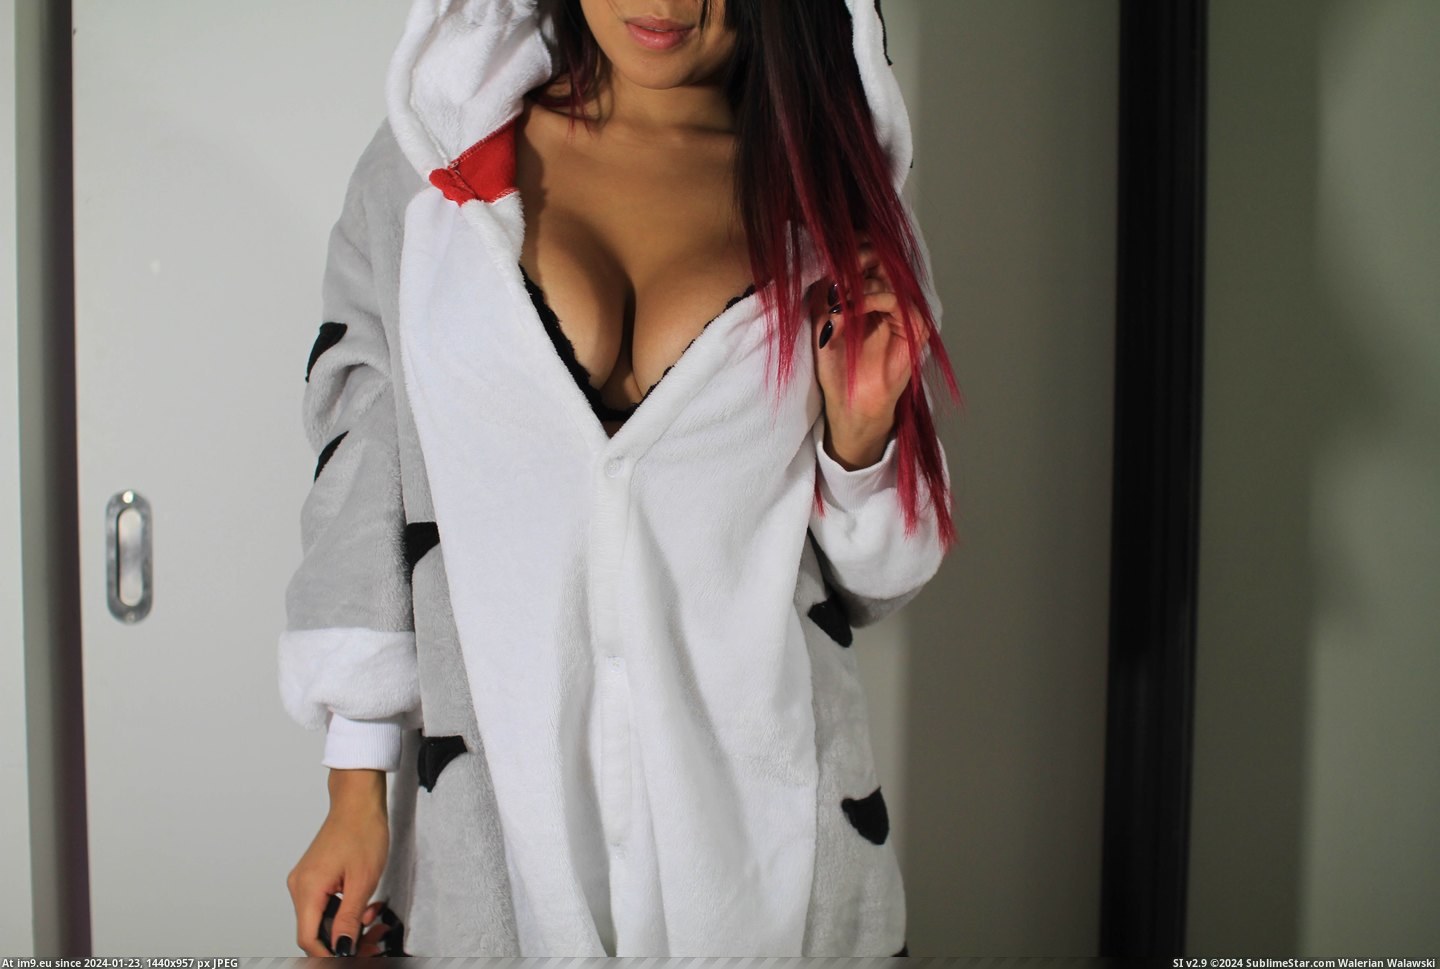 #Sexy #Was #How #Told #Onesie #Cat #Way [Gonewild] I was told there was no way I could make my cat onesie sexy, how'd I do GW? [f] 4 Pic. (Изображение из альбом My r/GONEWILD favs))